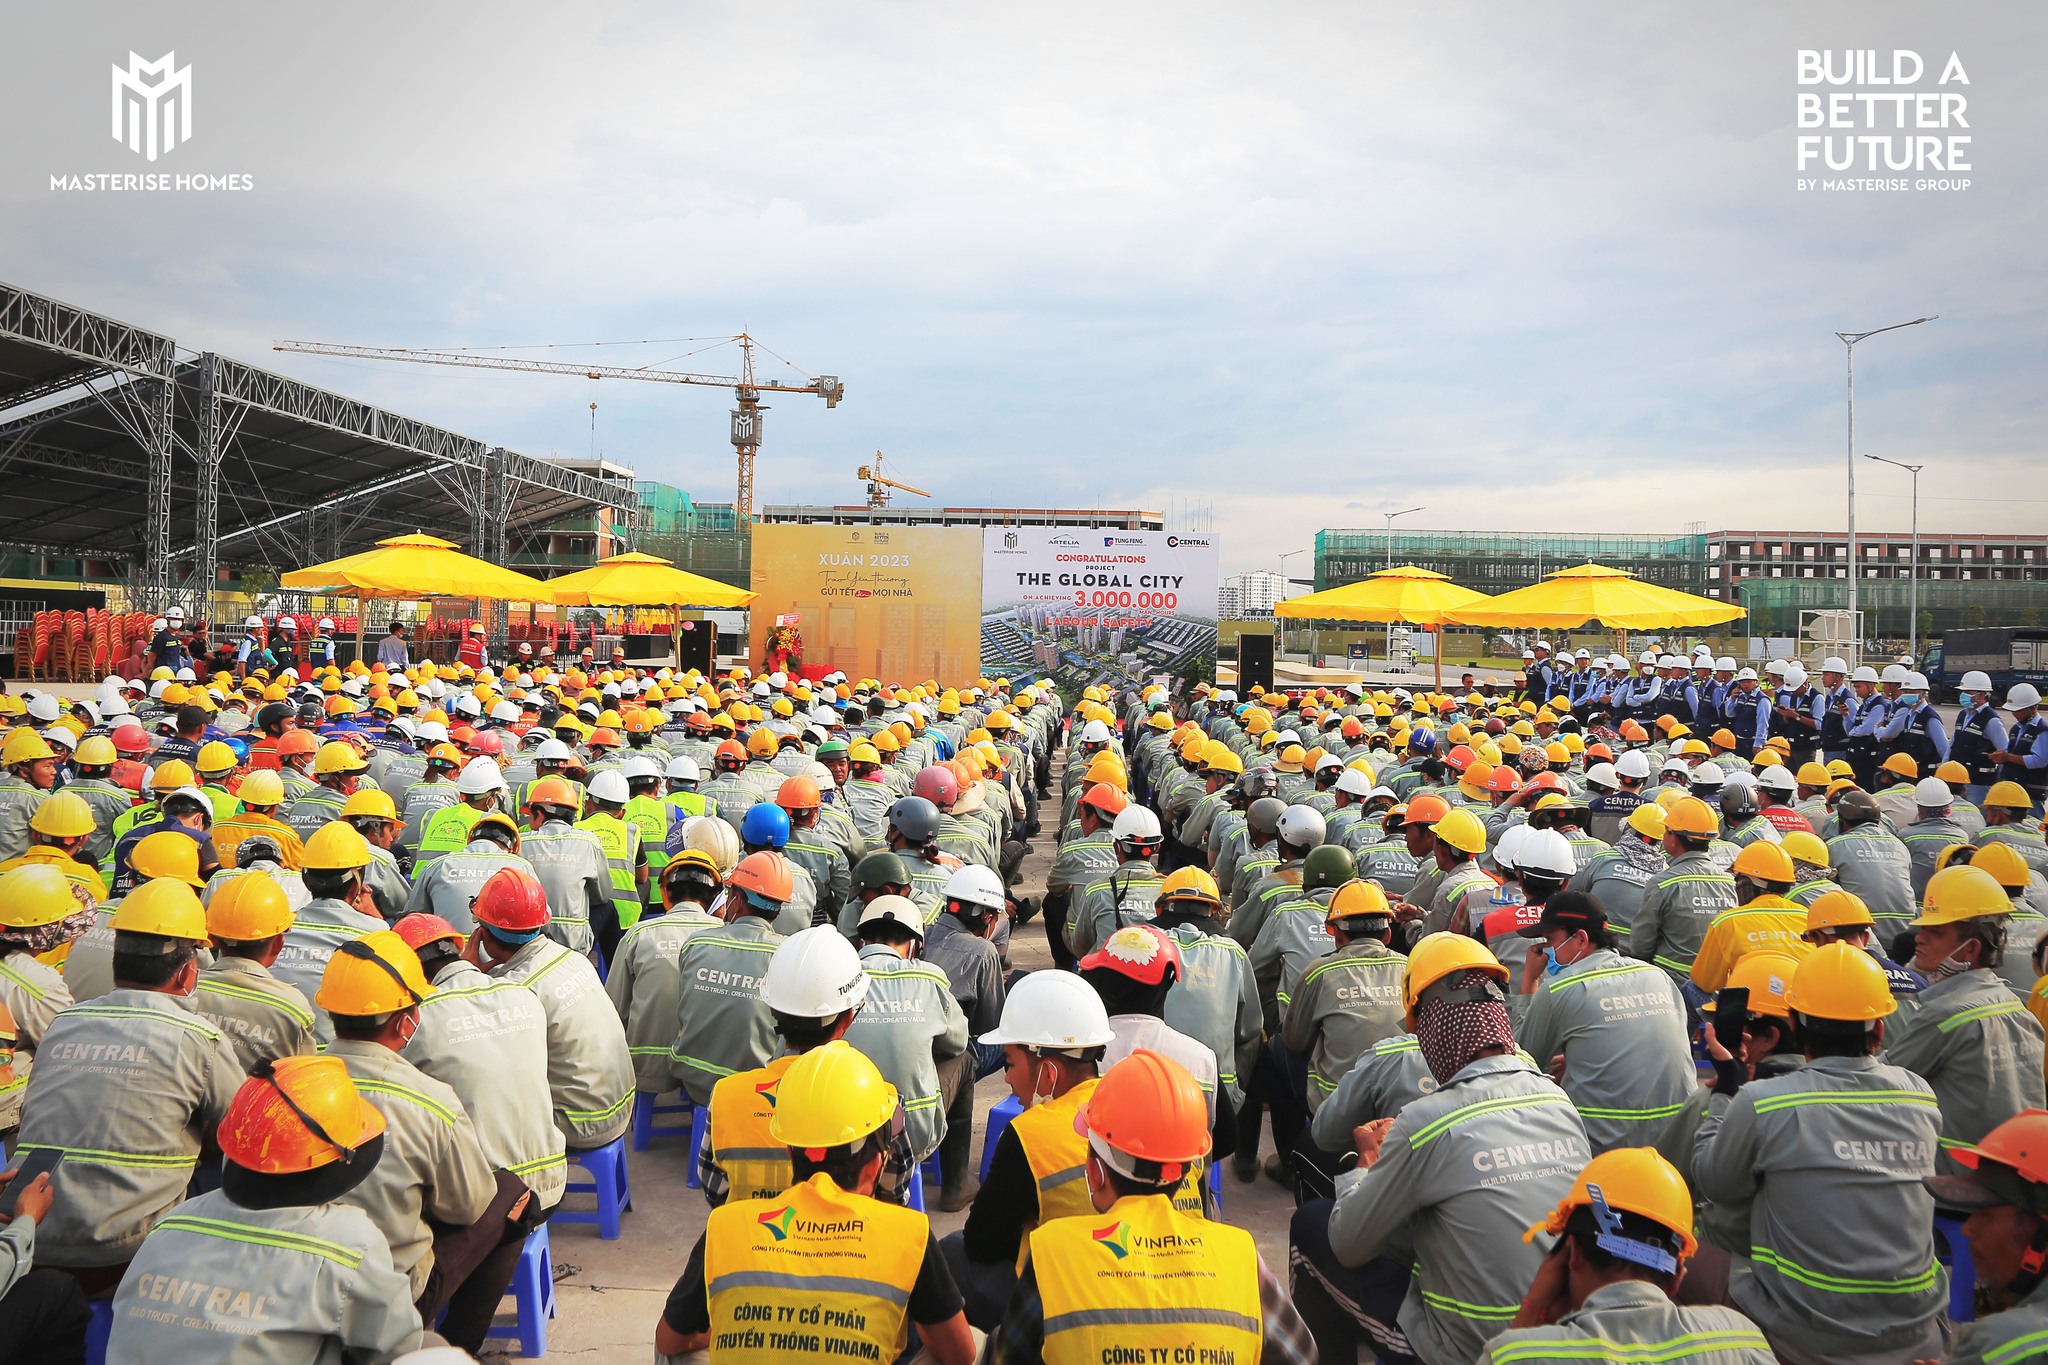 MASTERISE HOMES “SEND TET” TO OVER 9,000 WORKERS OF ALL CONTRACTORS PARTNER